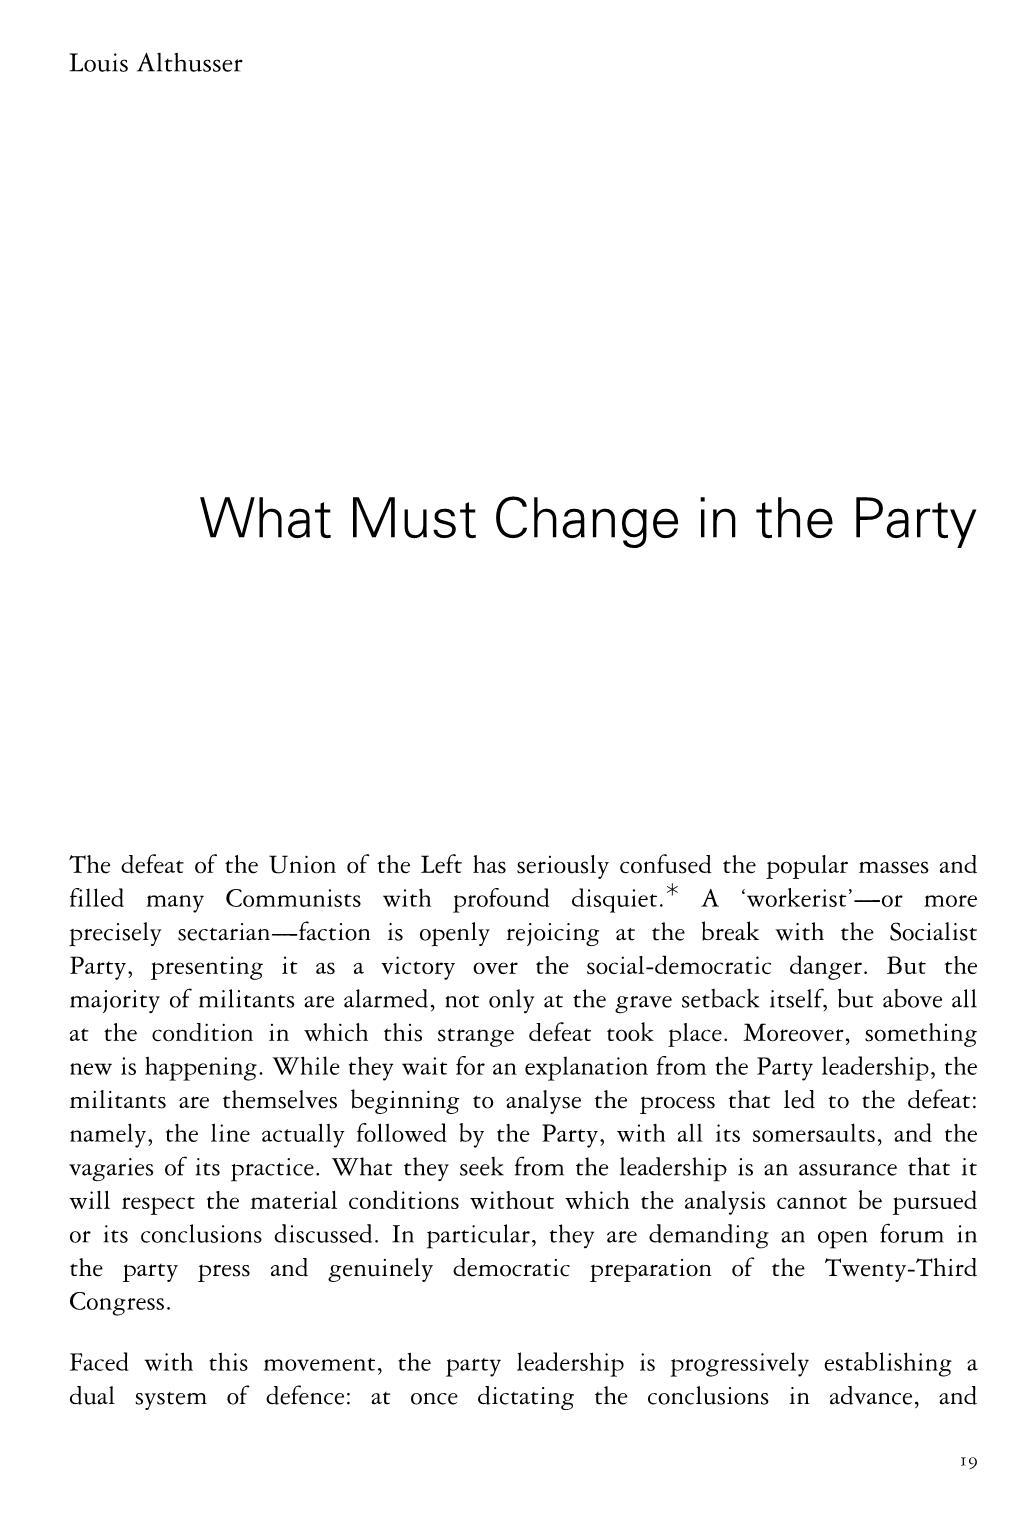 What Must Change in the Party